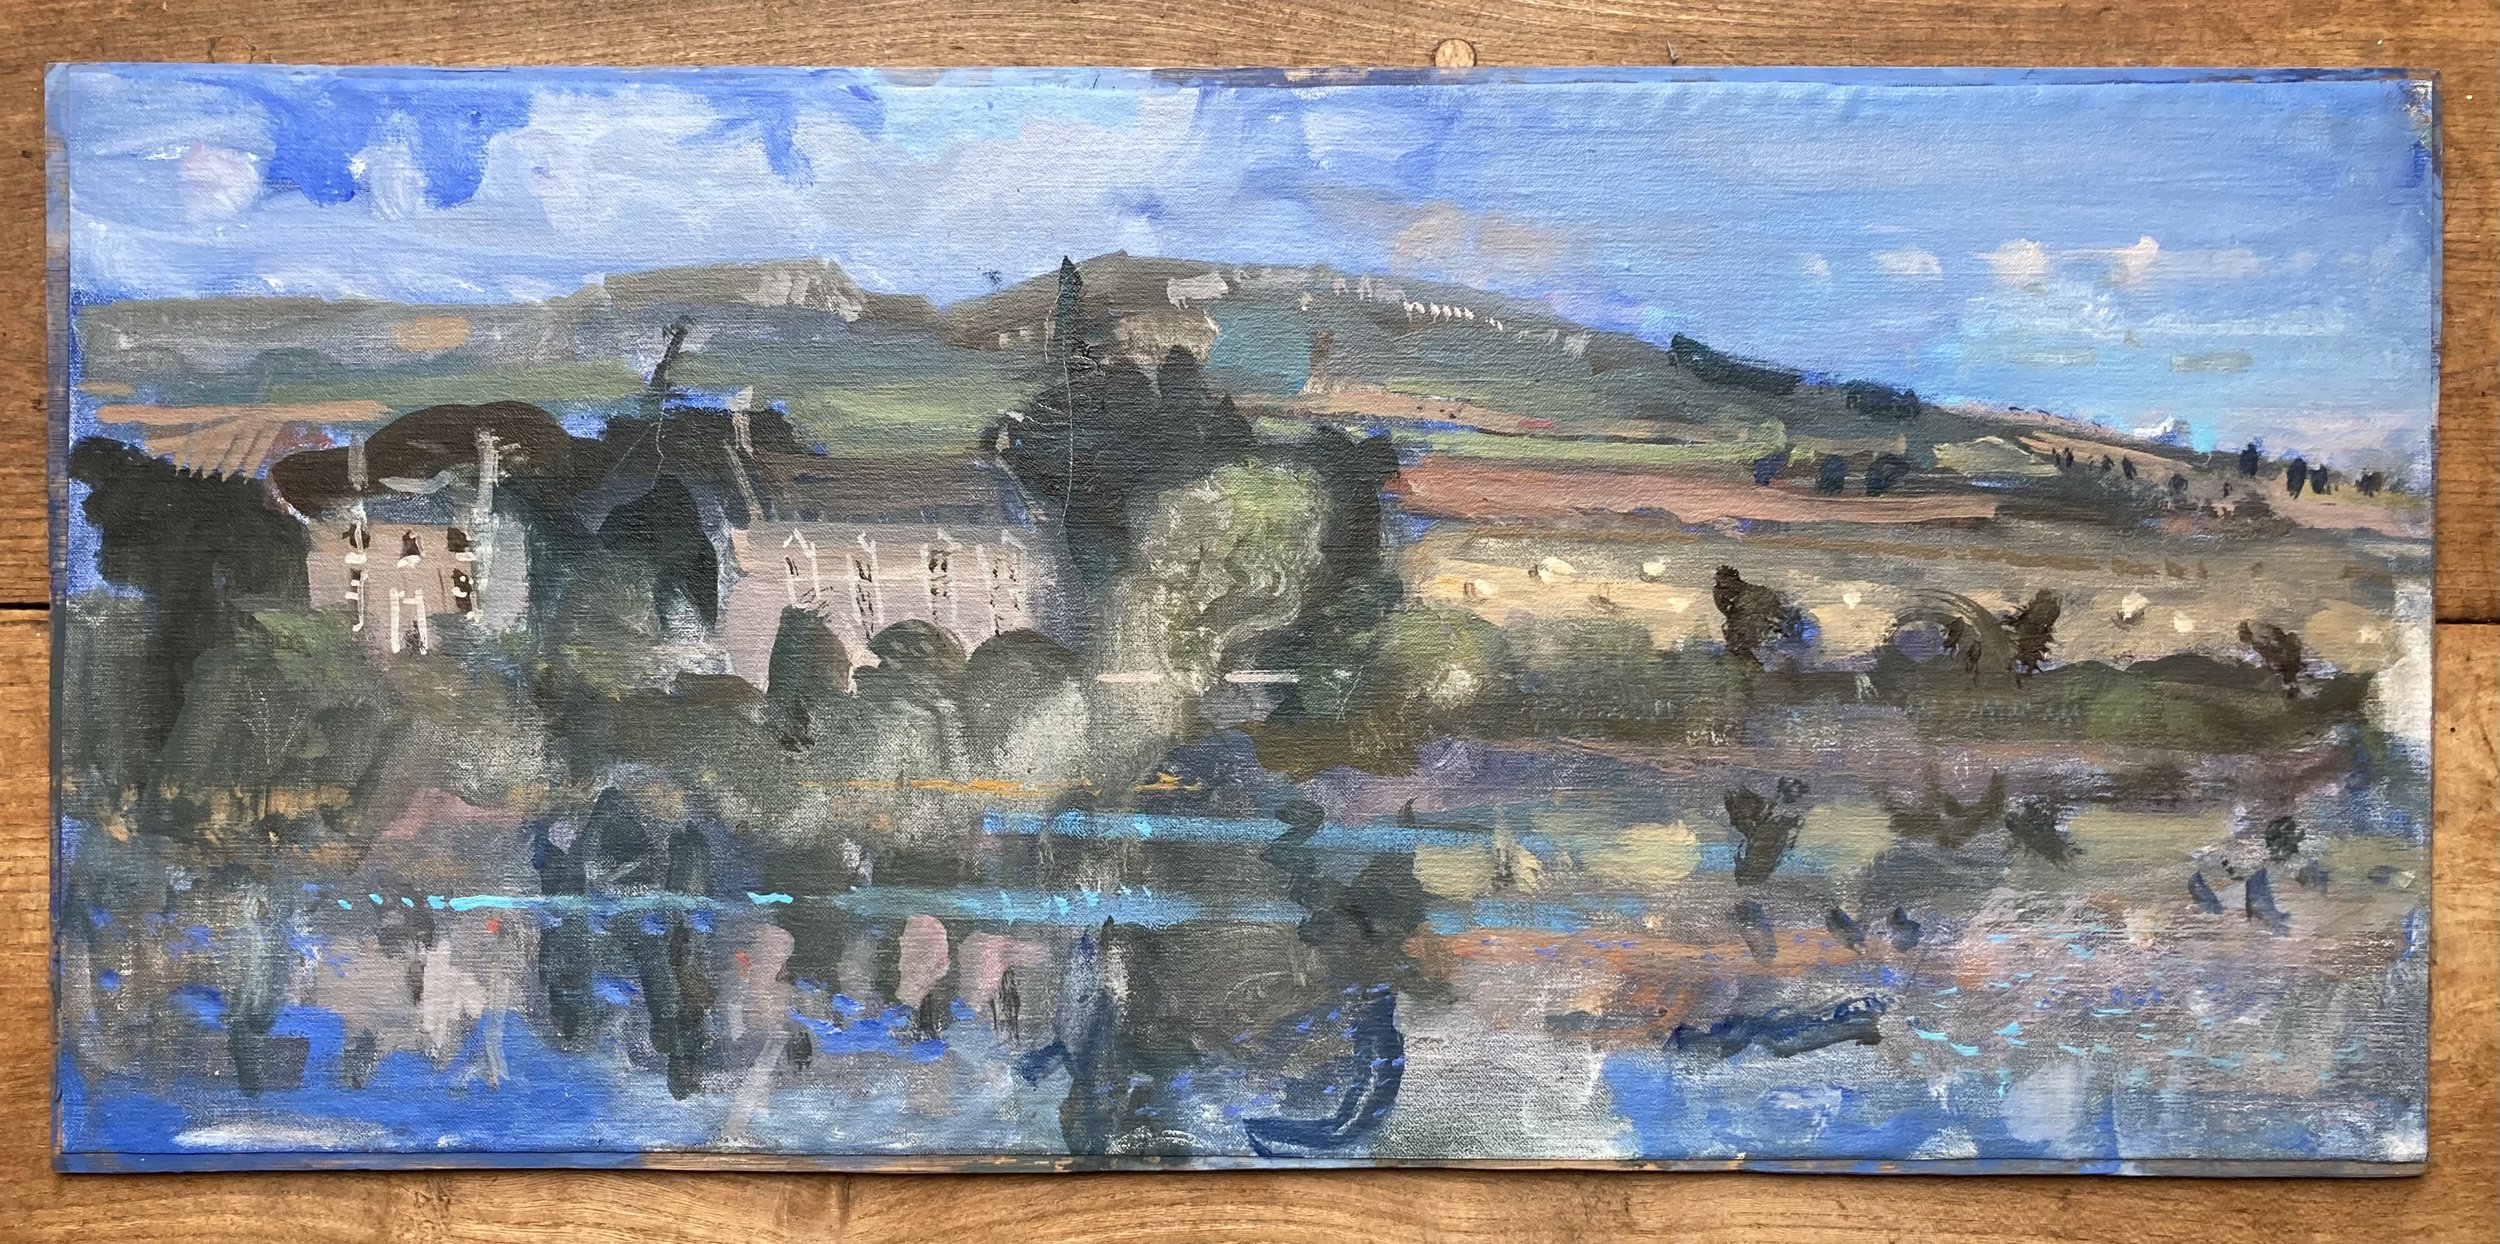 Study for Rescobie Church  30x60 oil on canvas on linen 